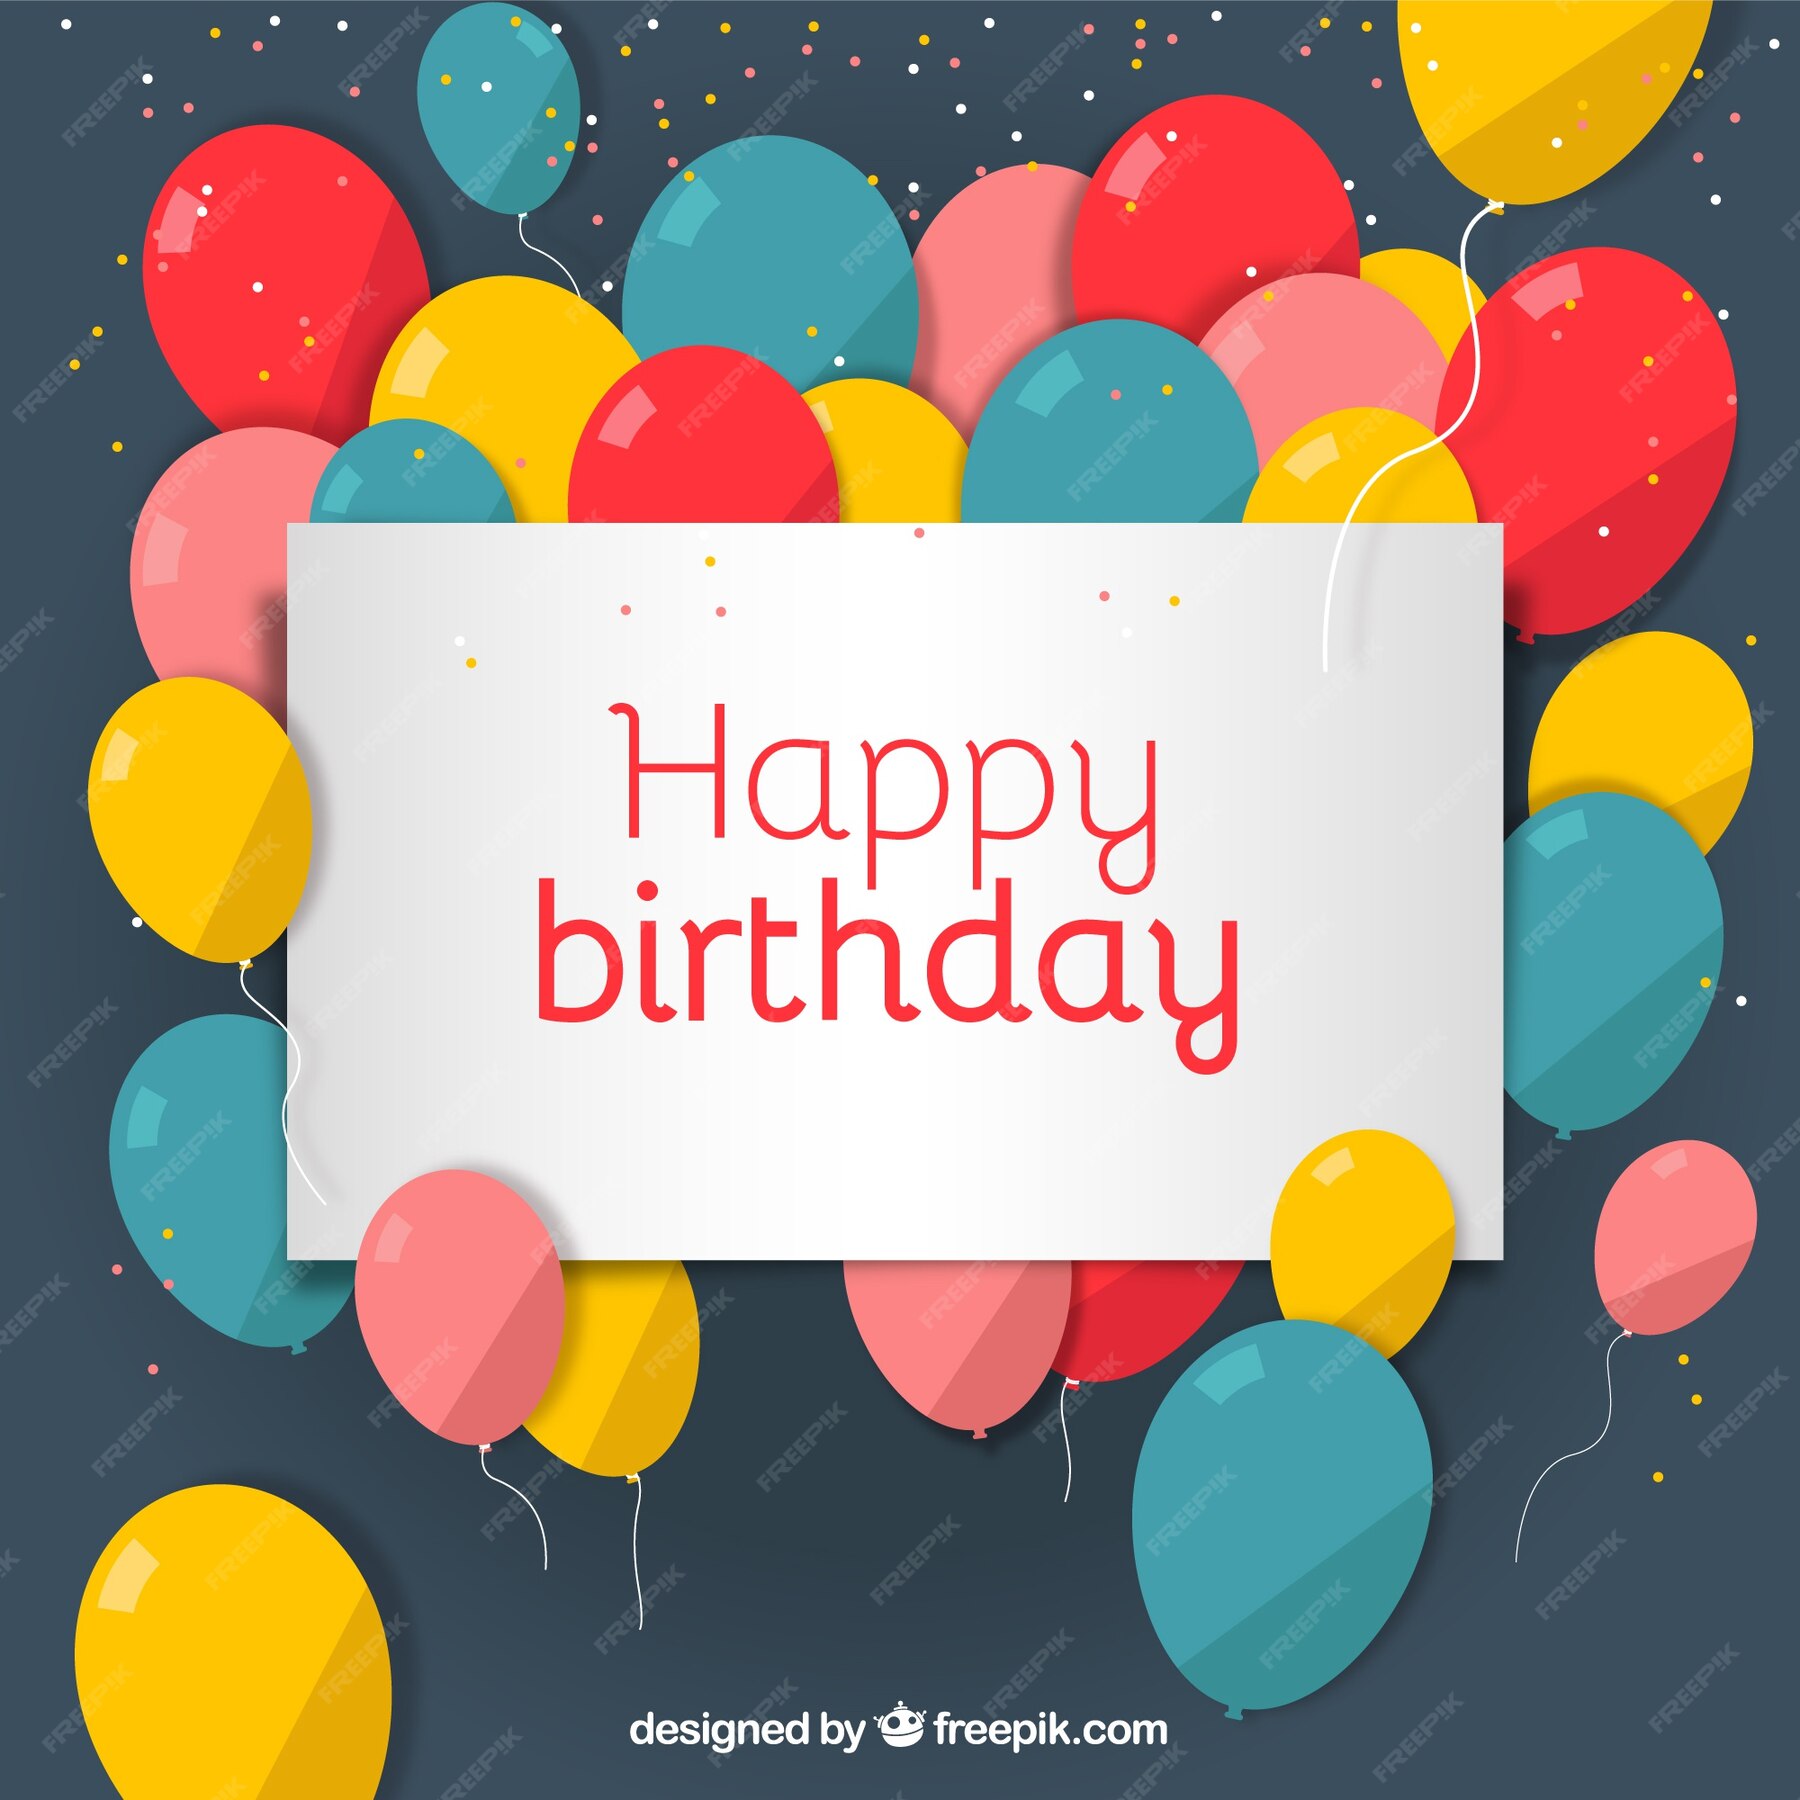 Free Vector | Birthday card with balloons